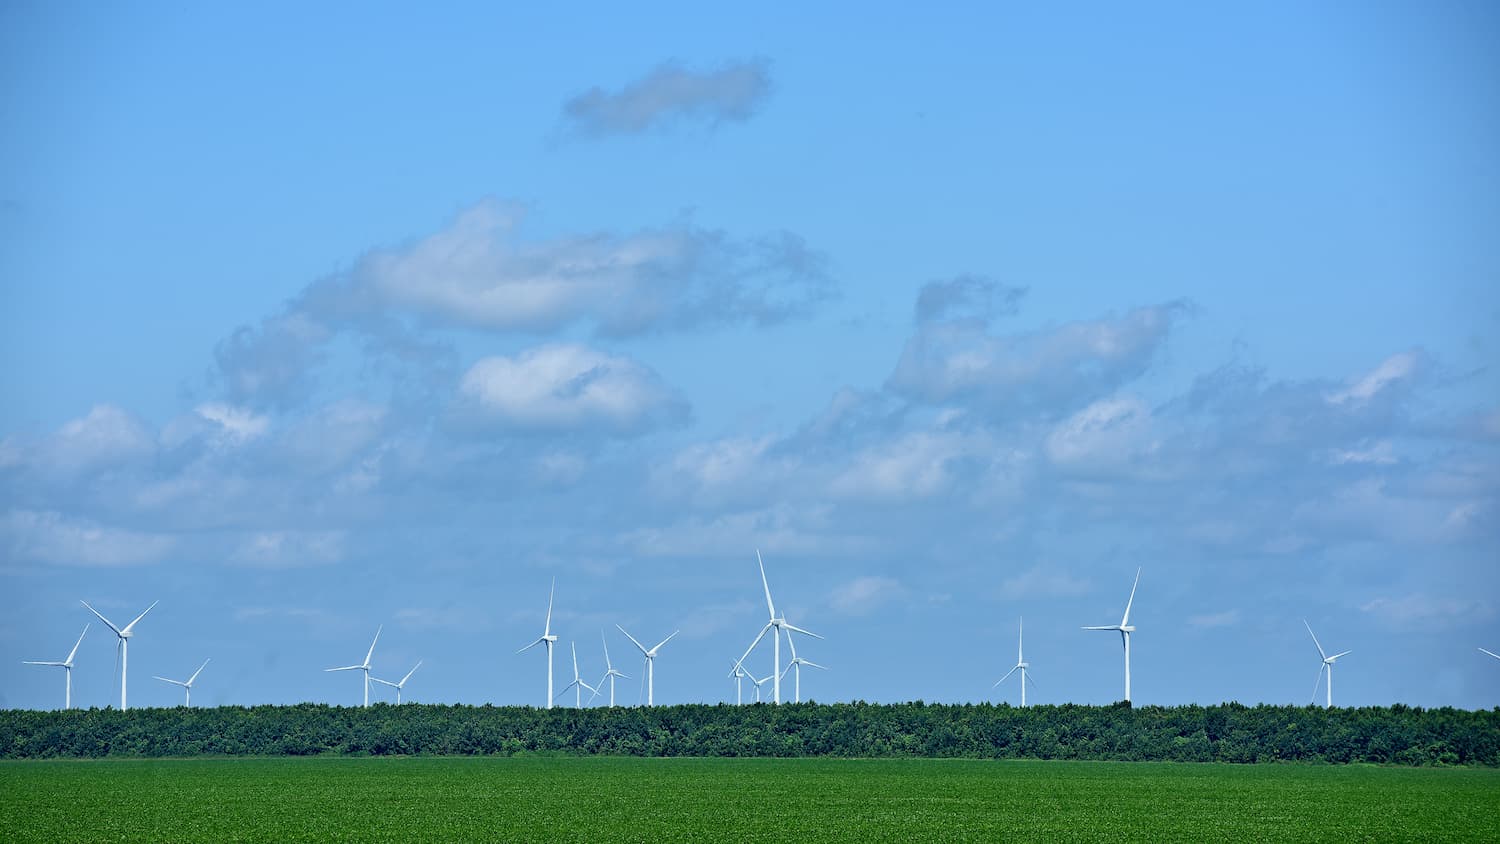 Energy-producing windmills rise up behind soy bean fields, harnessing electrical power.